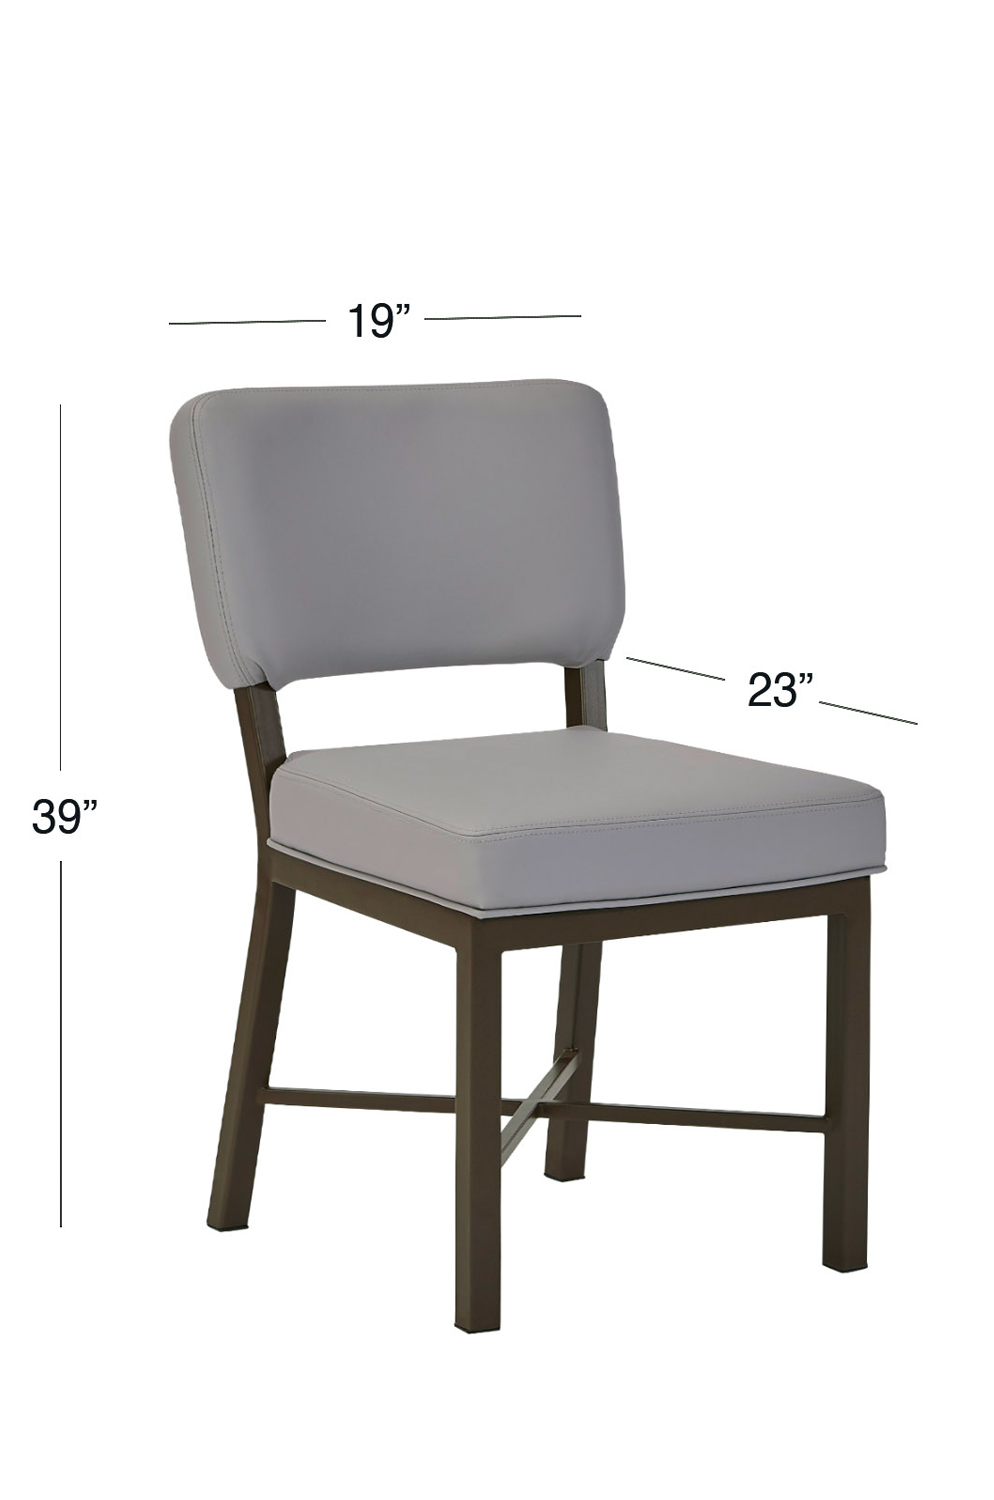 Miami Modern Upholstered Dining Chair